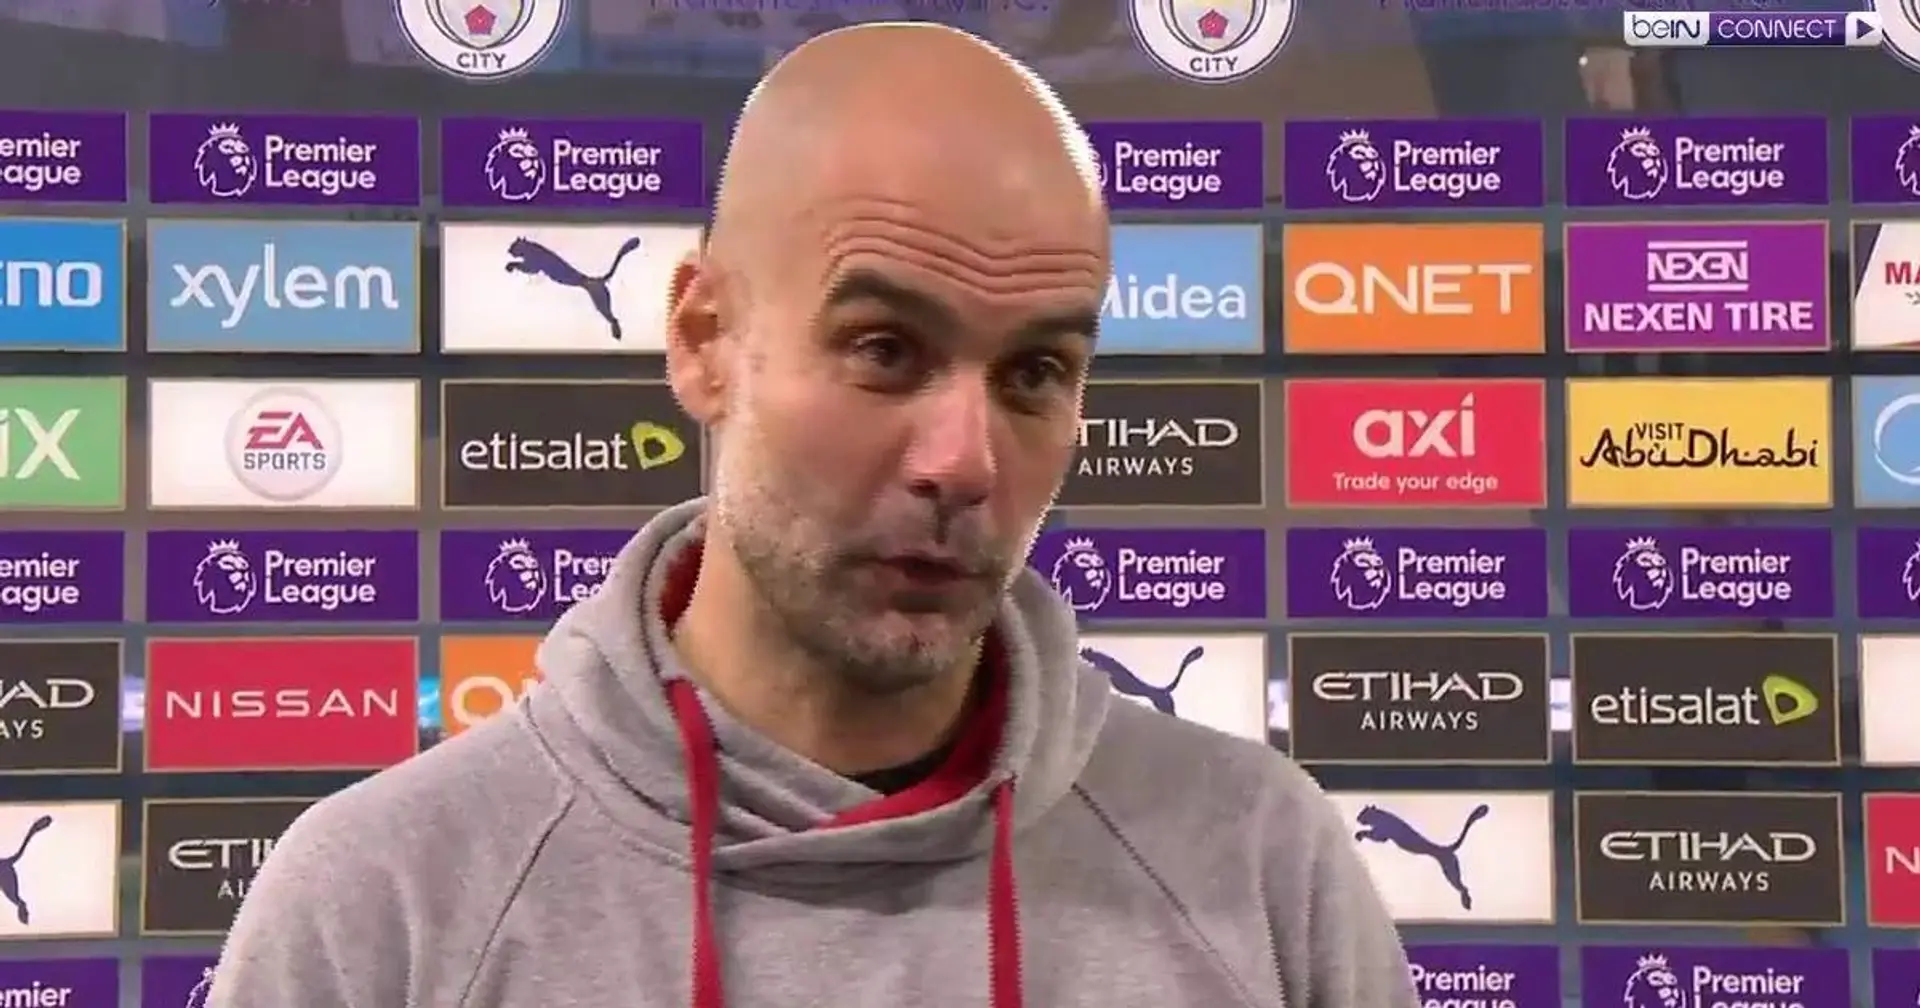 'The first half was better than the second': Pep Guardiola on beating Man United 3-1